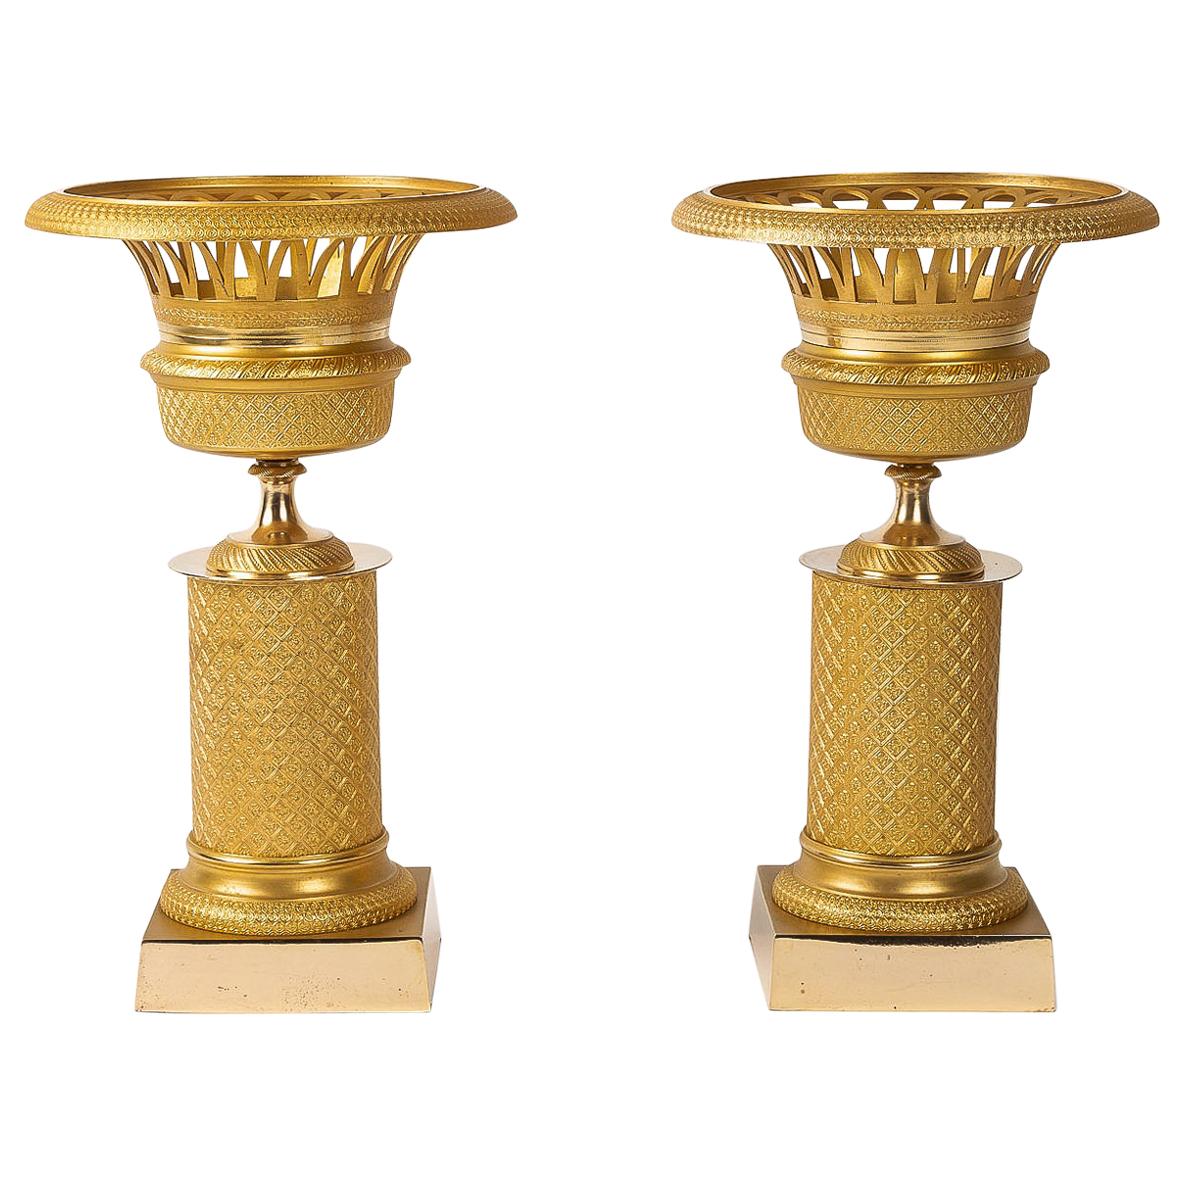 French Restoration Period Pair of Gilt-Bronze Cups, circa 1815-1830